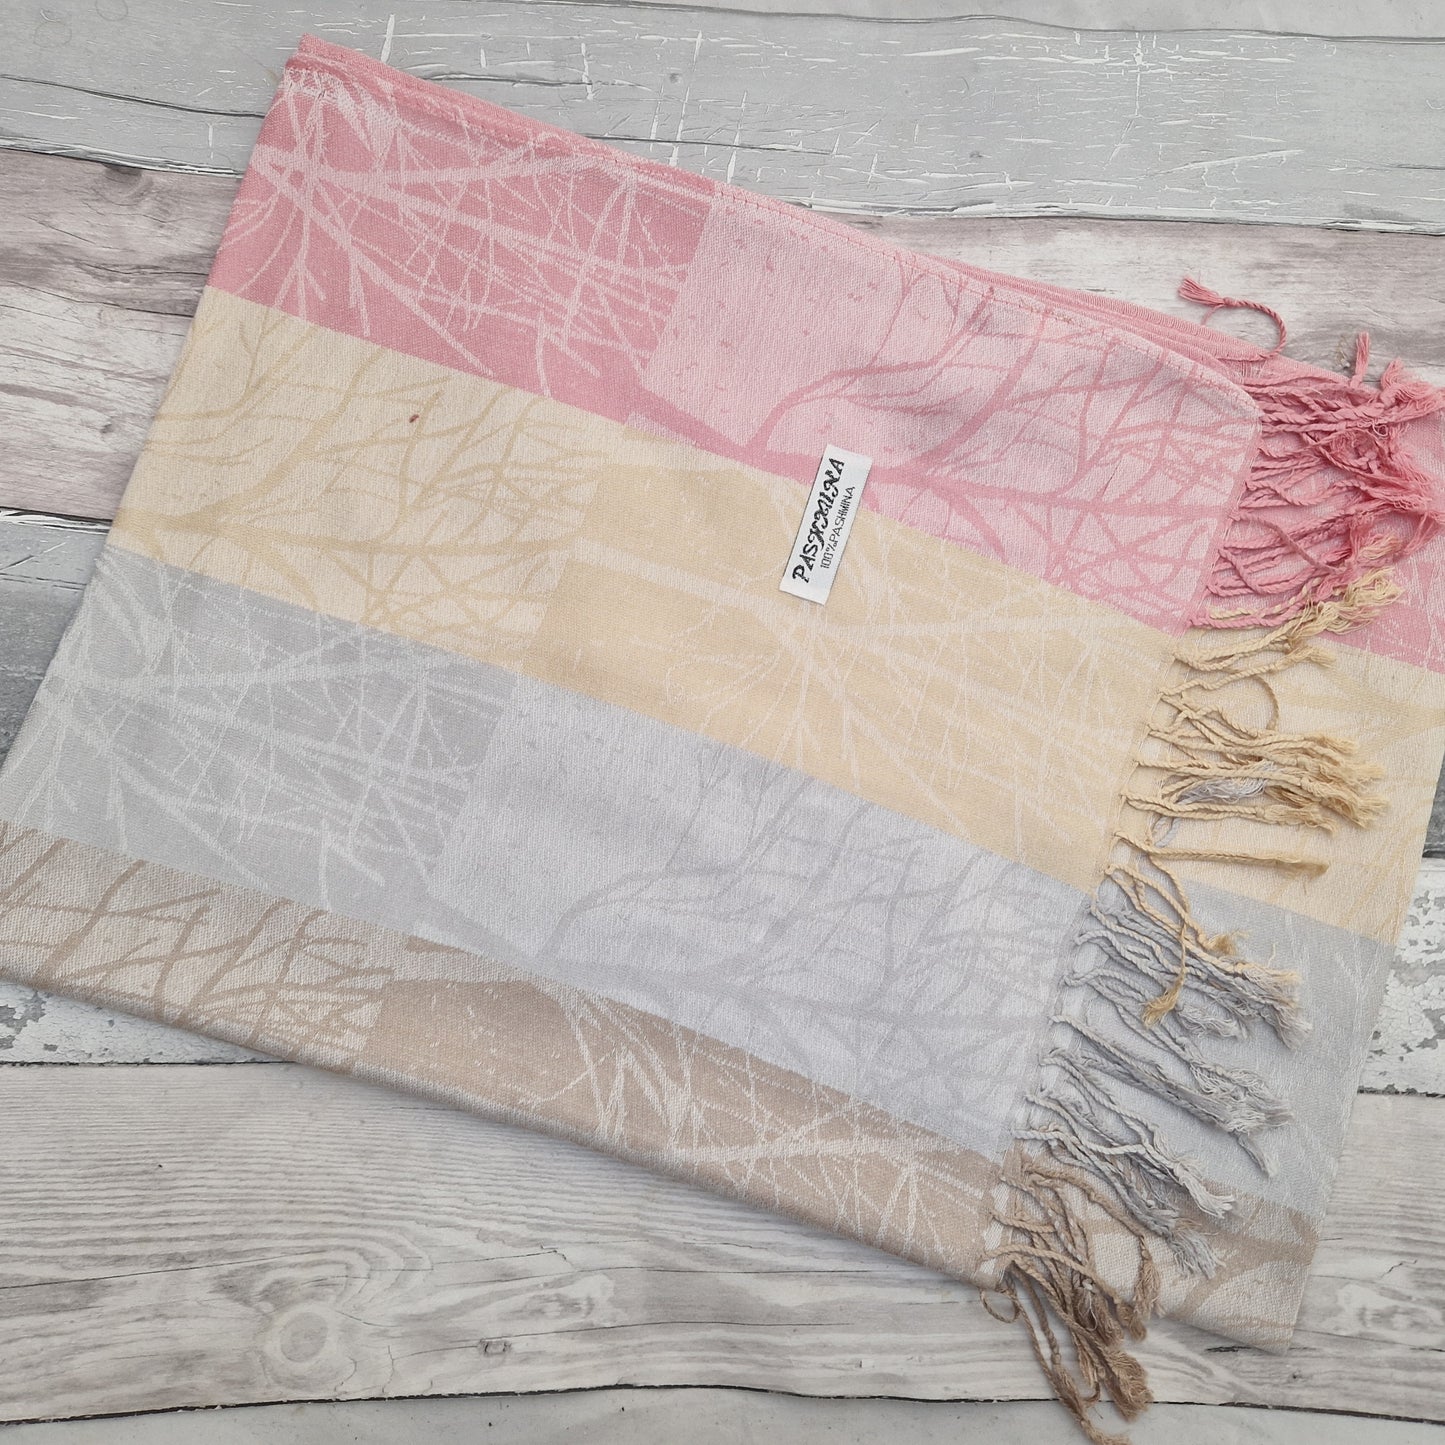 A Neapolitan of pink, lemon and silver bring this beautiful woodland scarf to life.